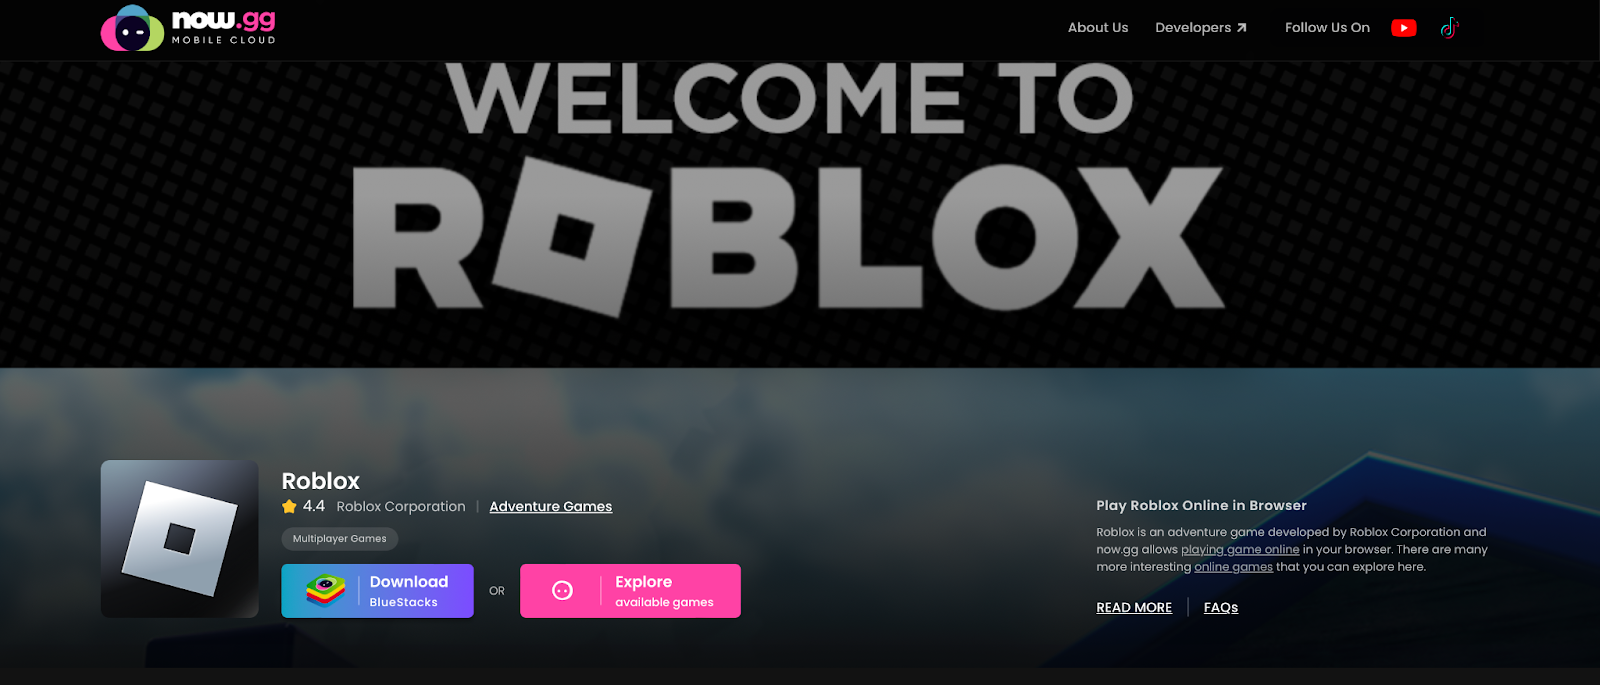 roblox online now.gg